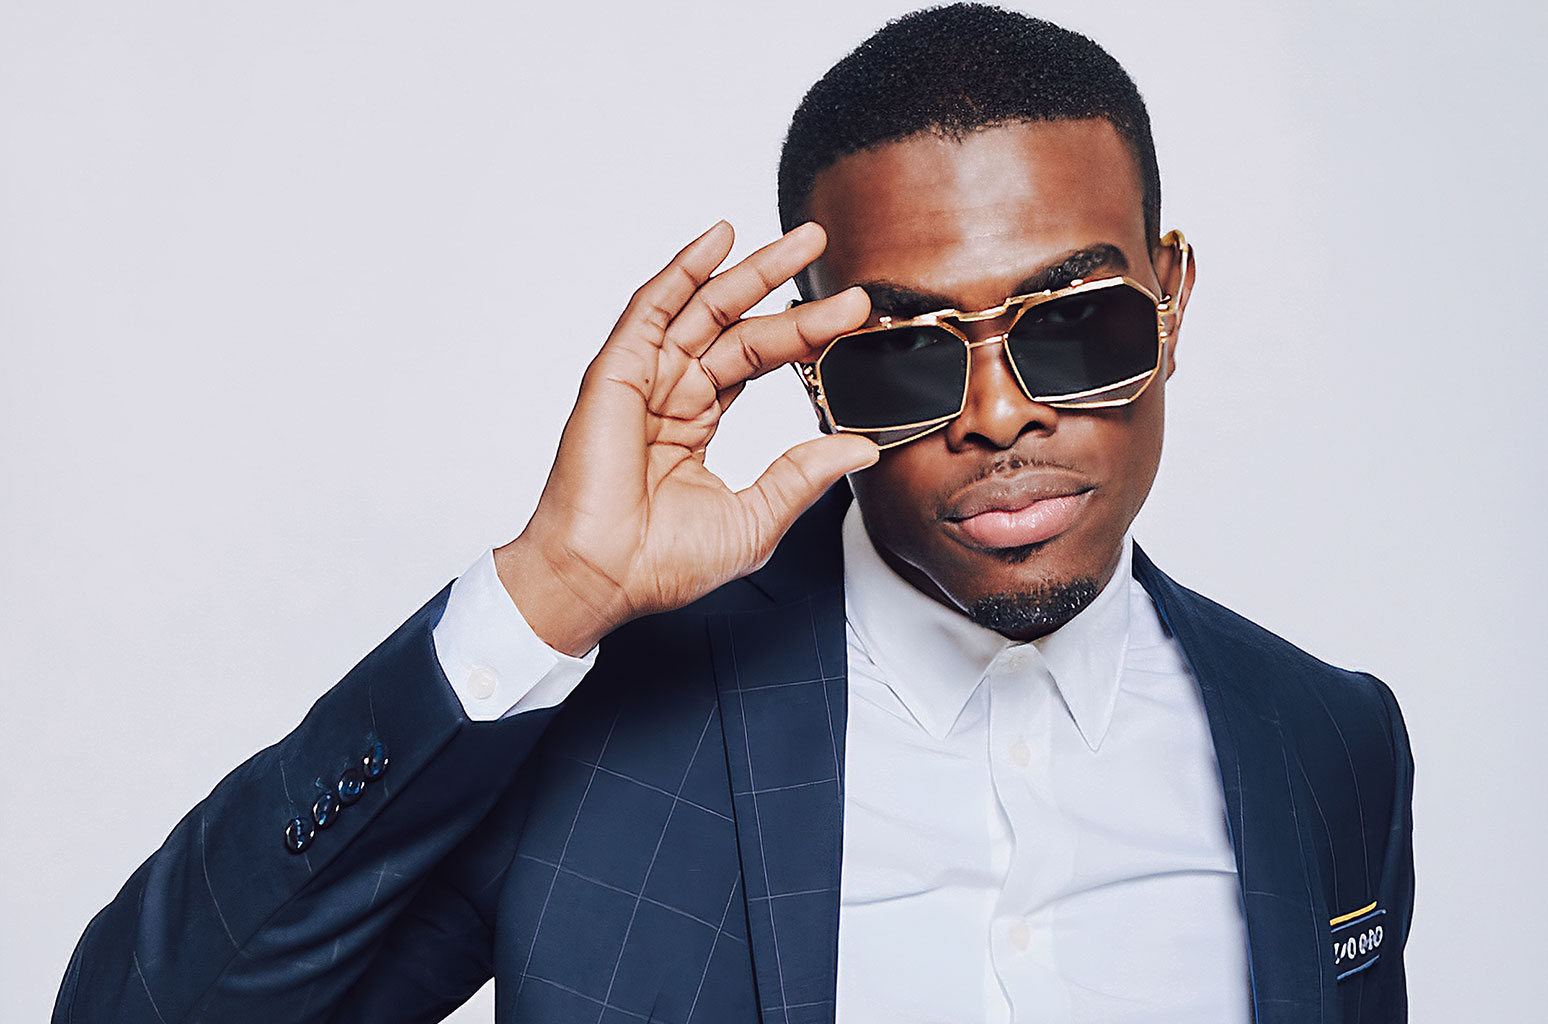 Omi Will Bring Your Next Party Alive With 'I Want You' - www.billboard.com - Jamaica